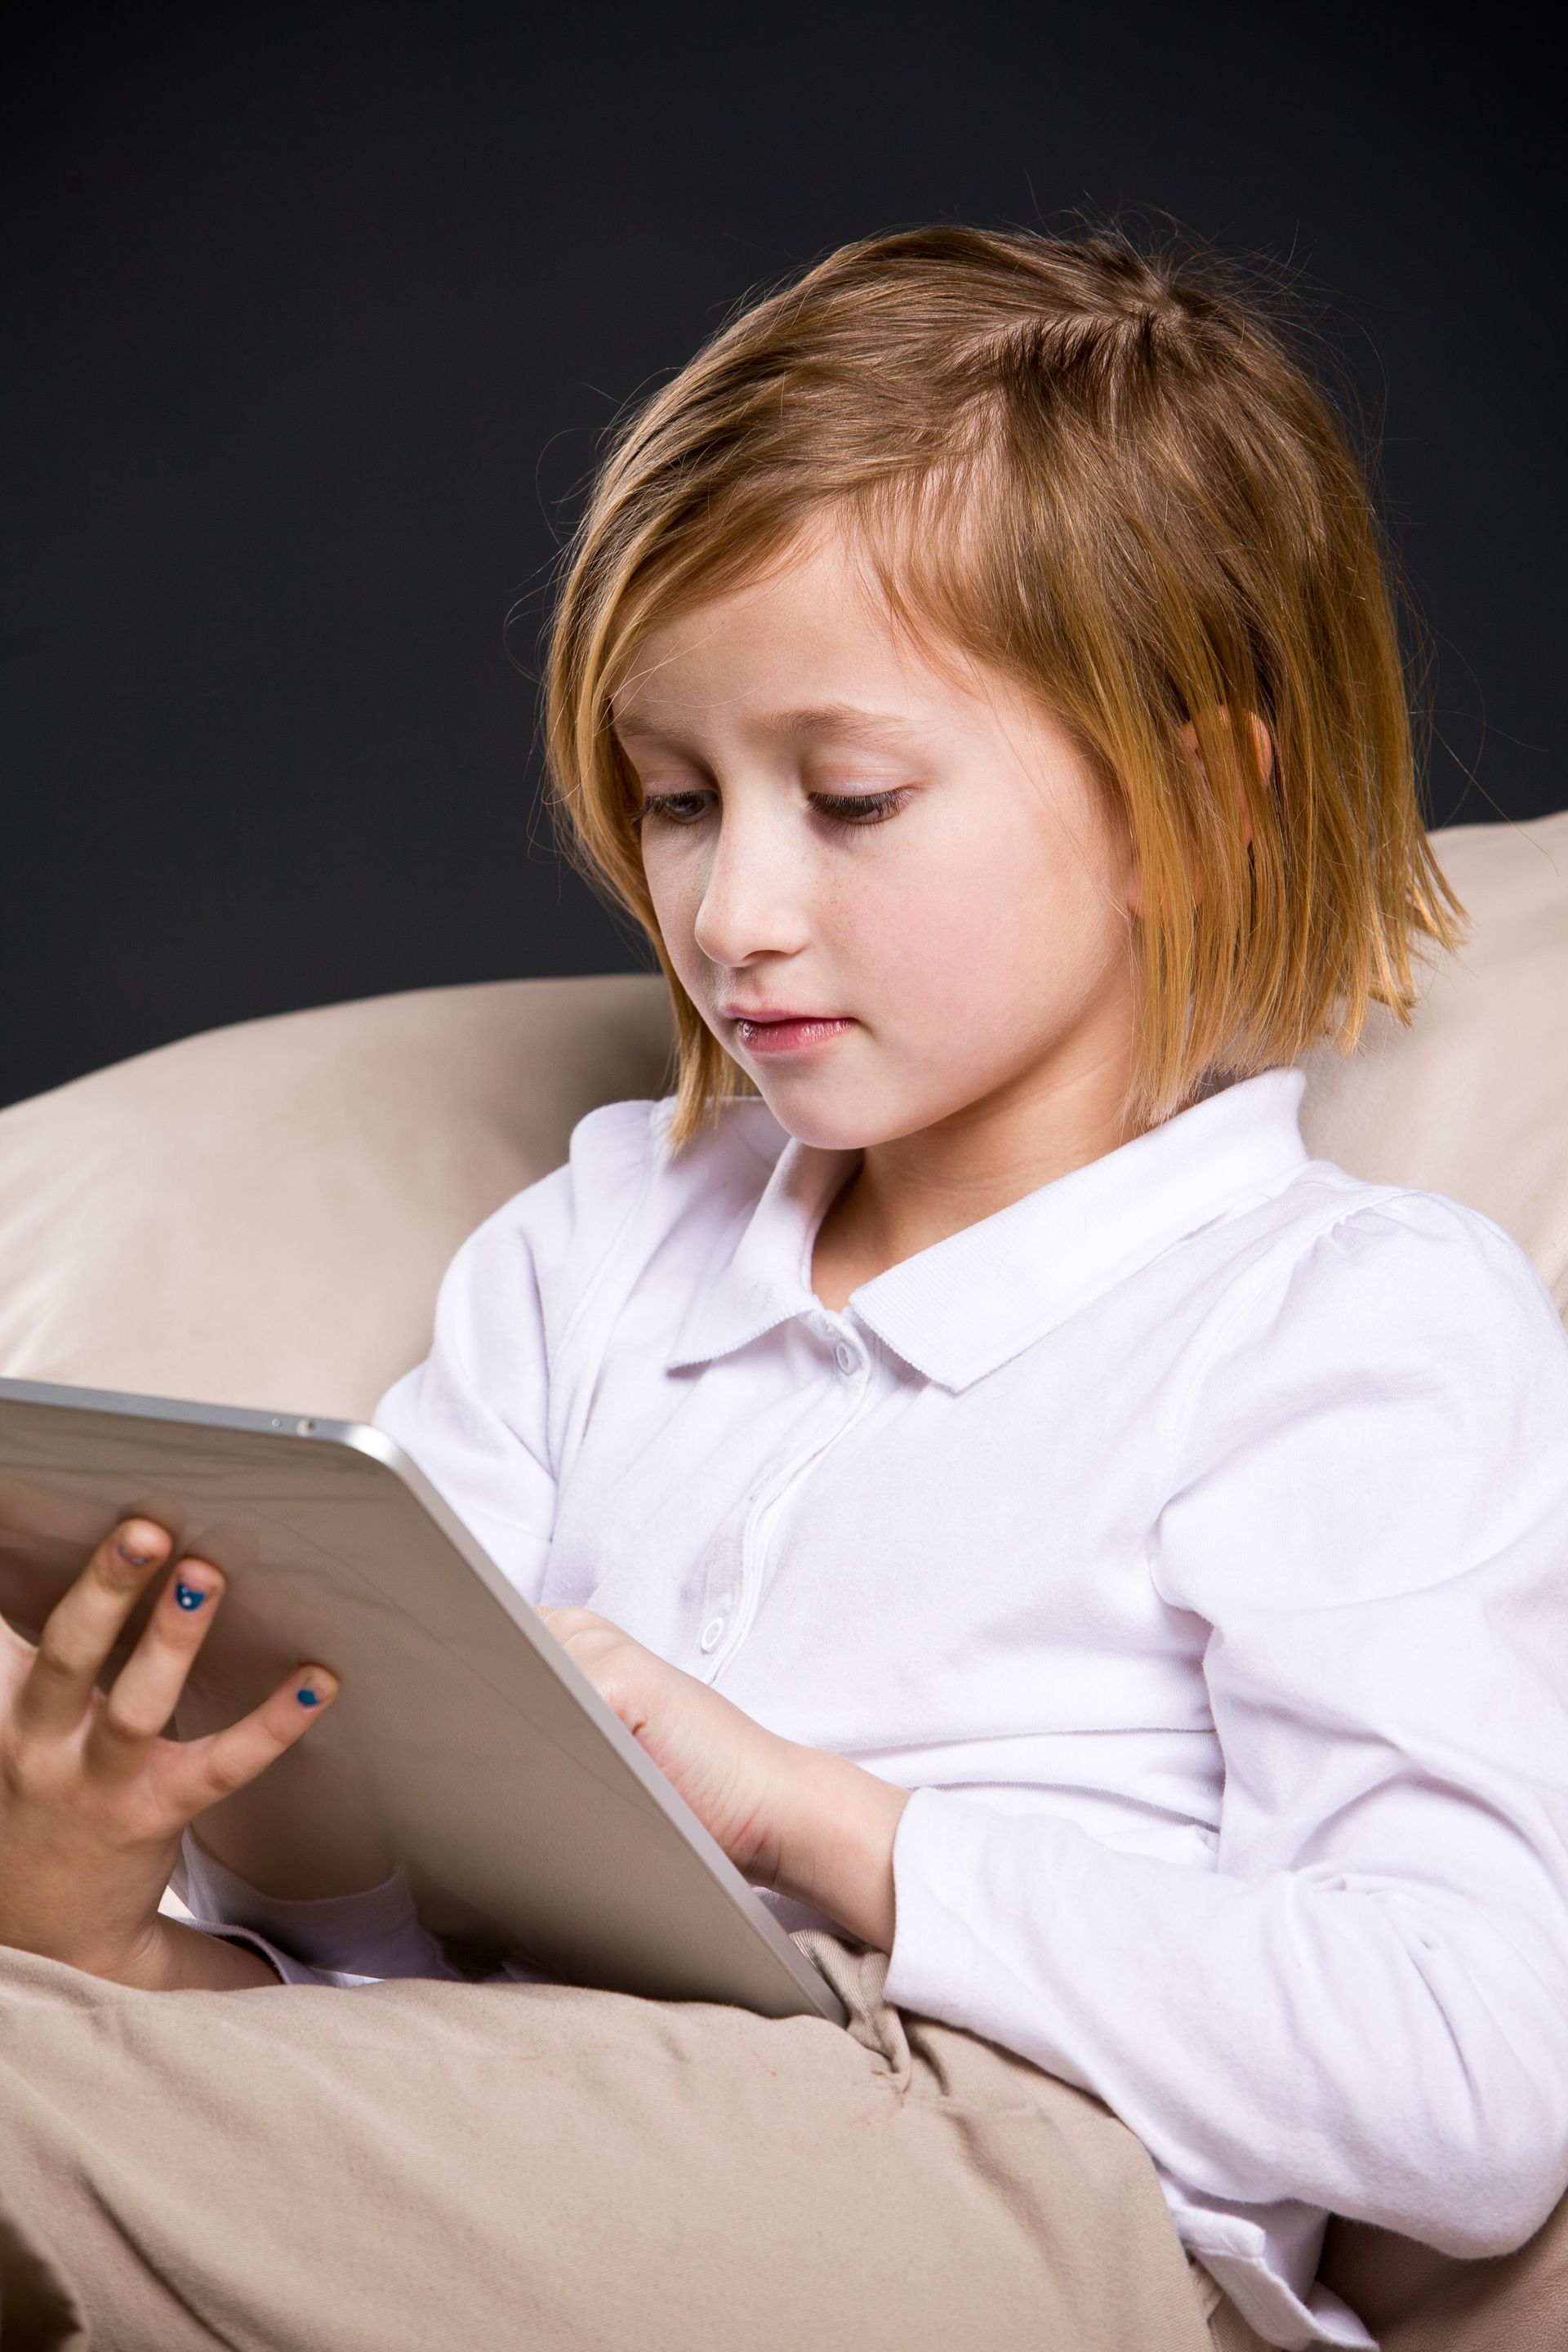 A young girl sits and looks at a tablet.